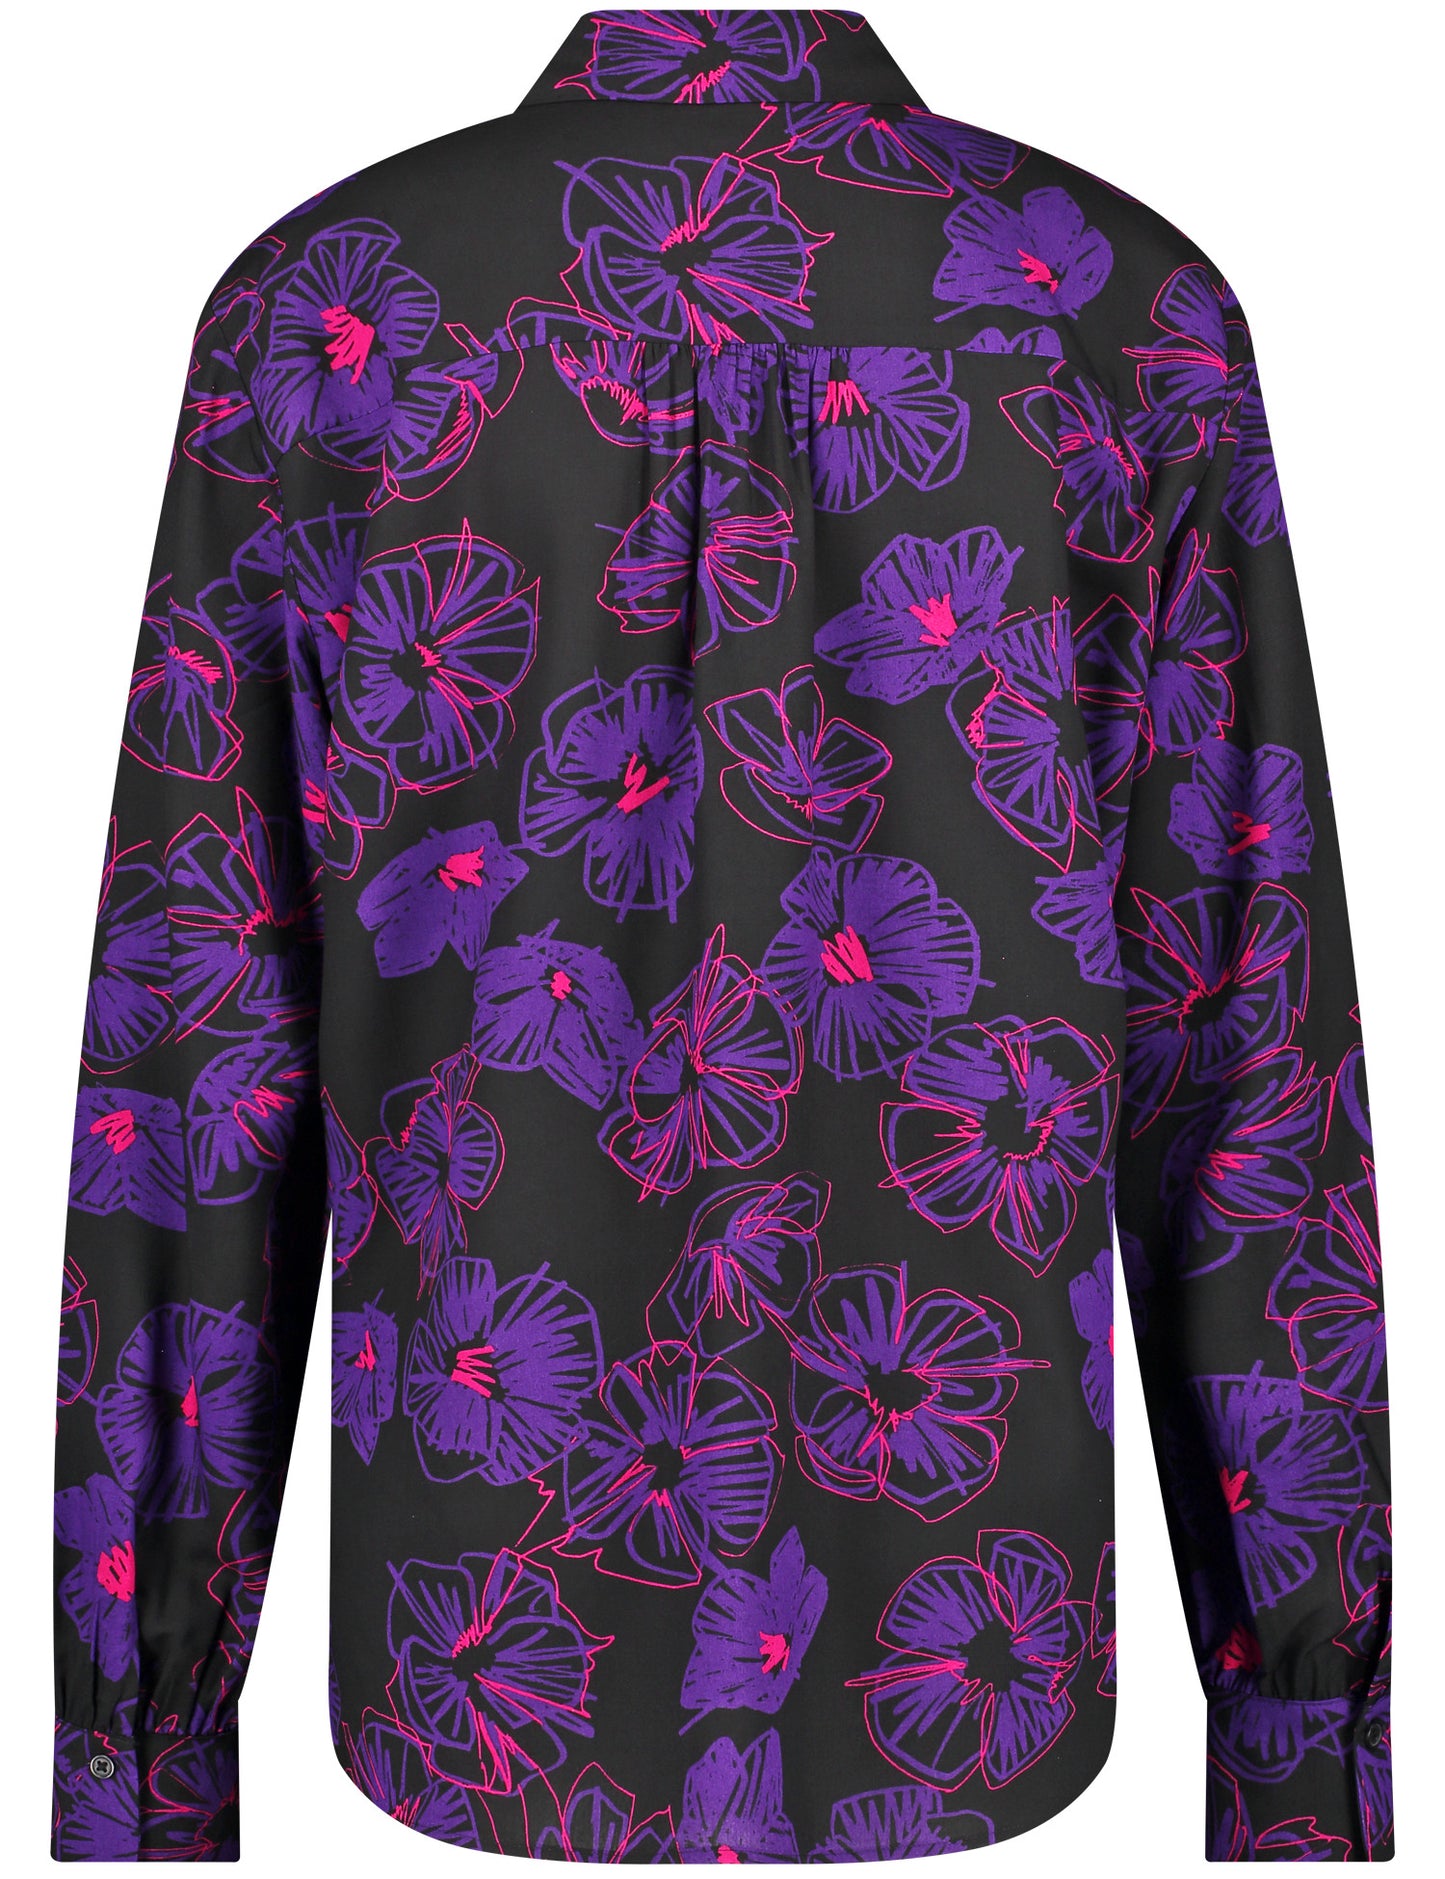 Long-sleeved blouse with a floral pattern